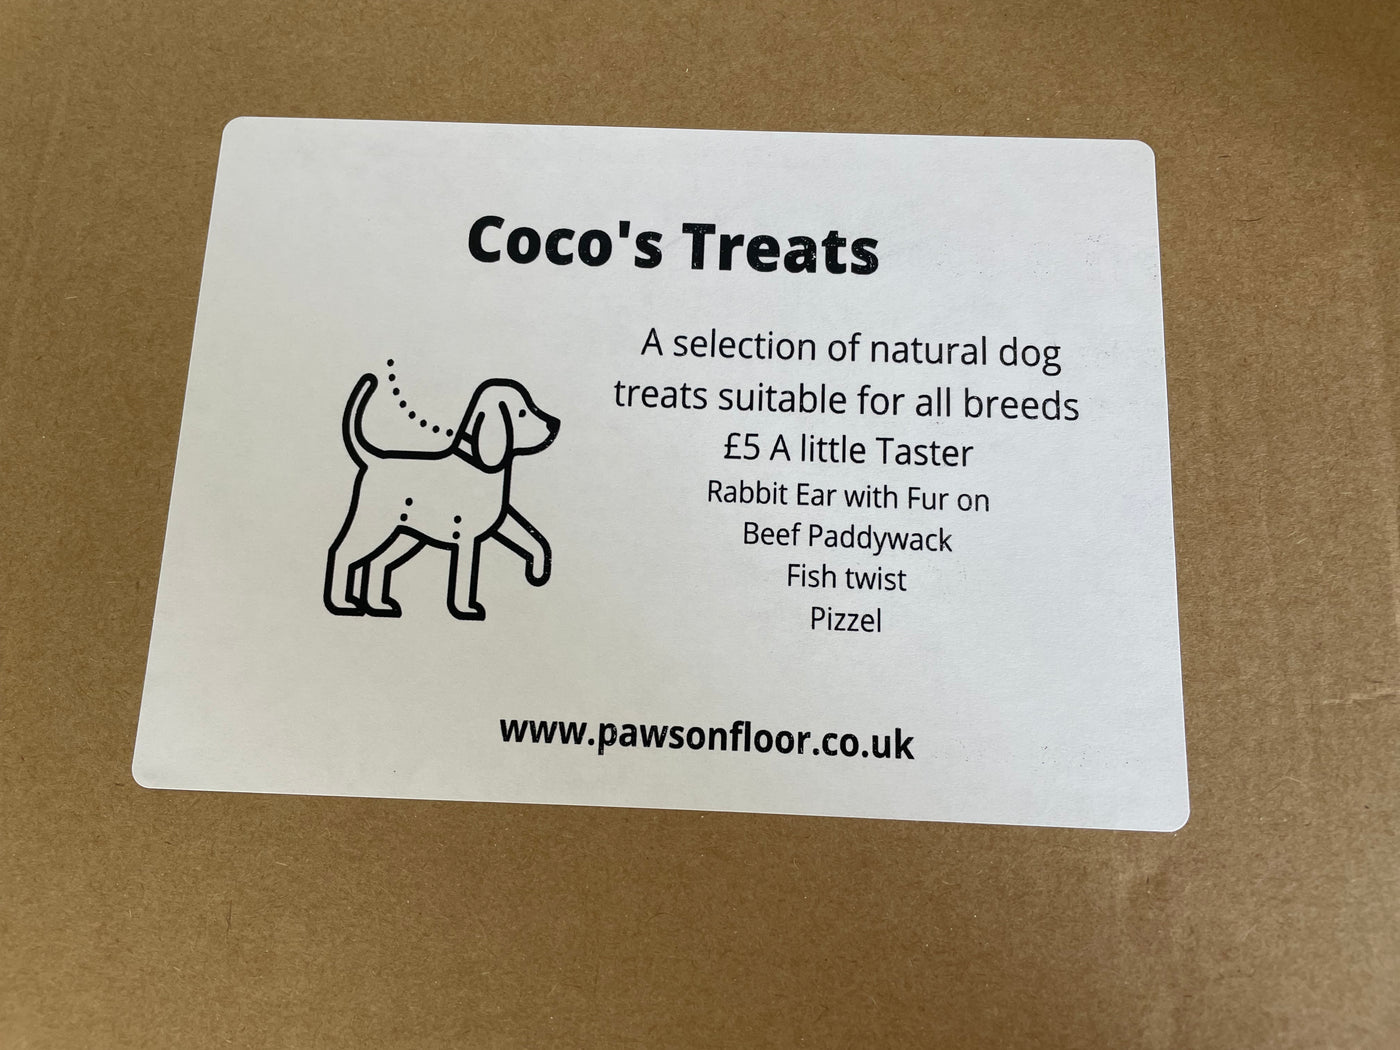 Coco's Treats - A Little Taster